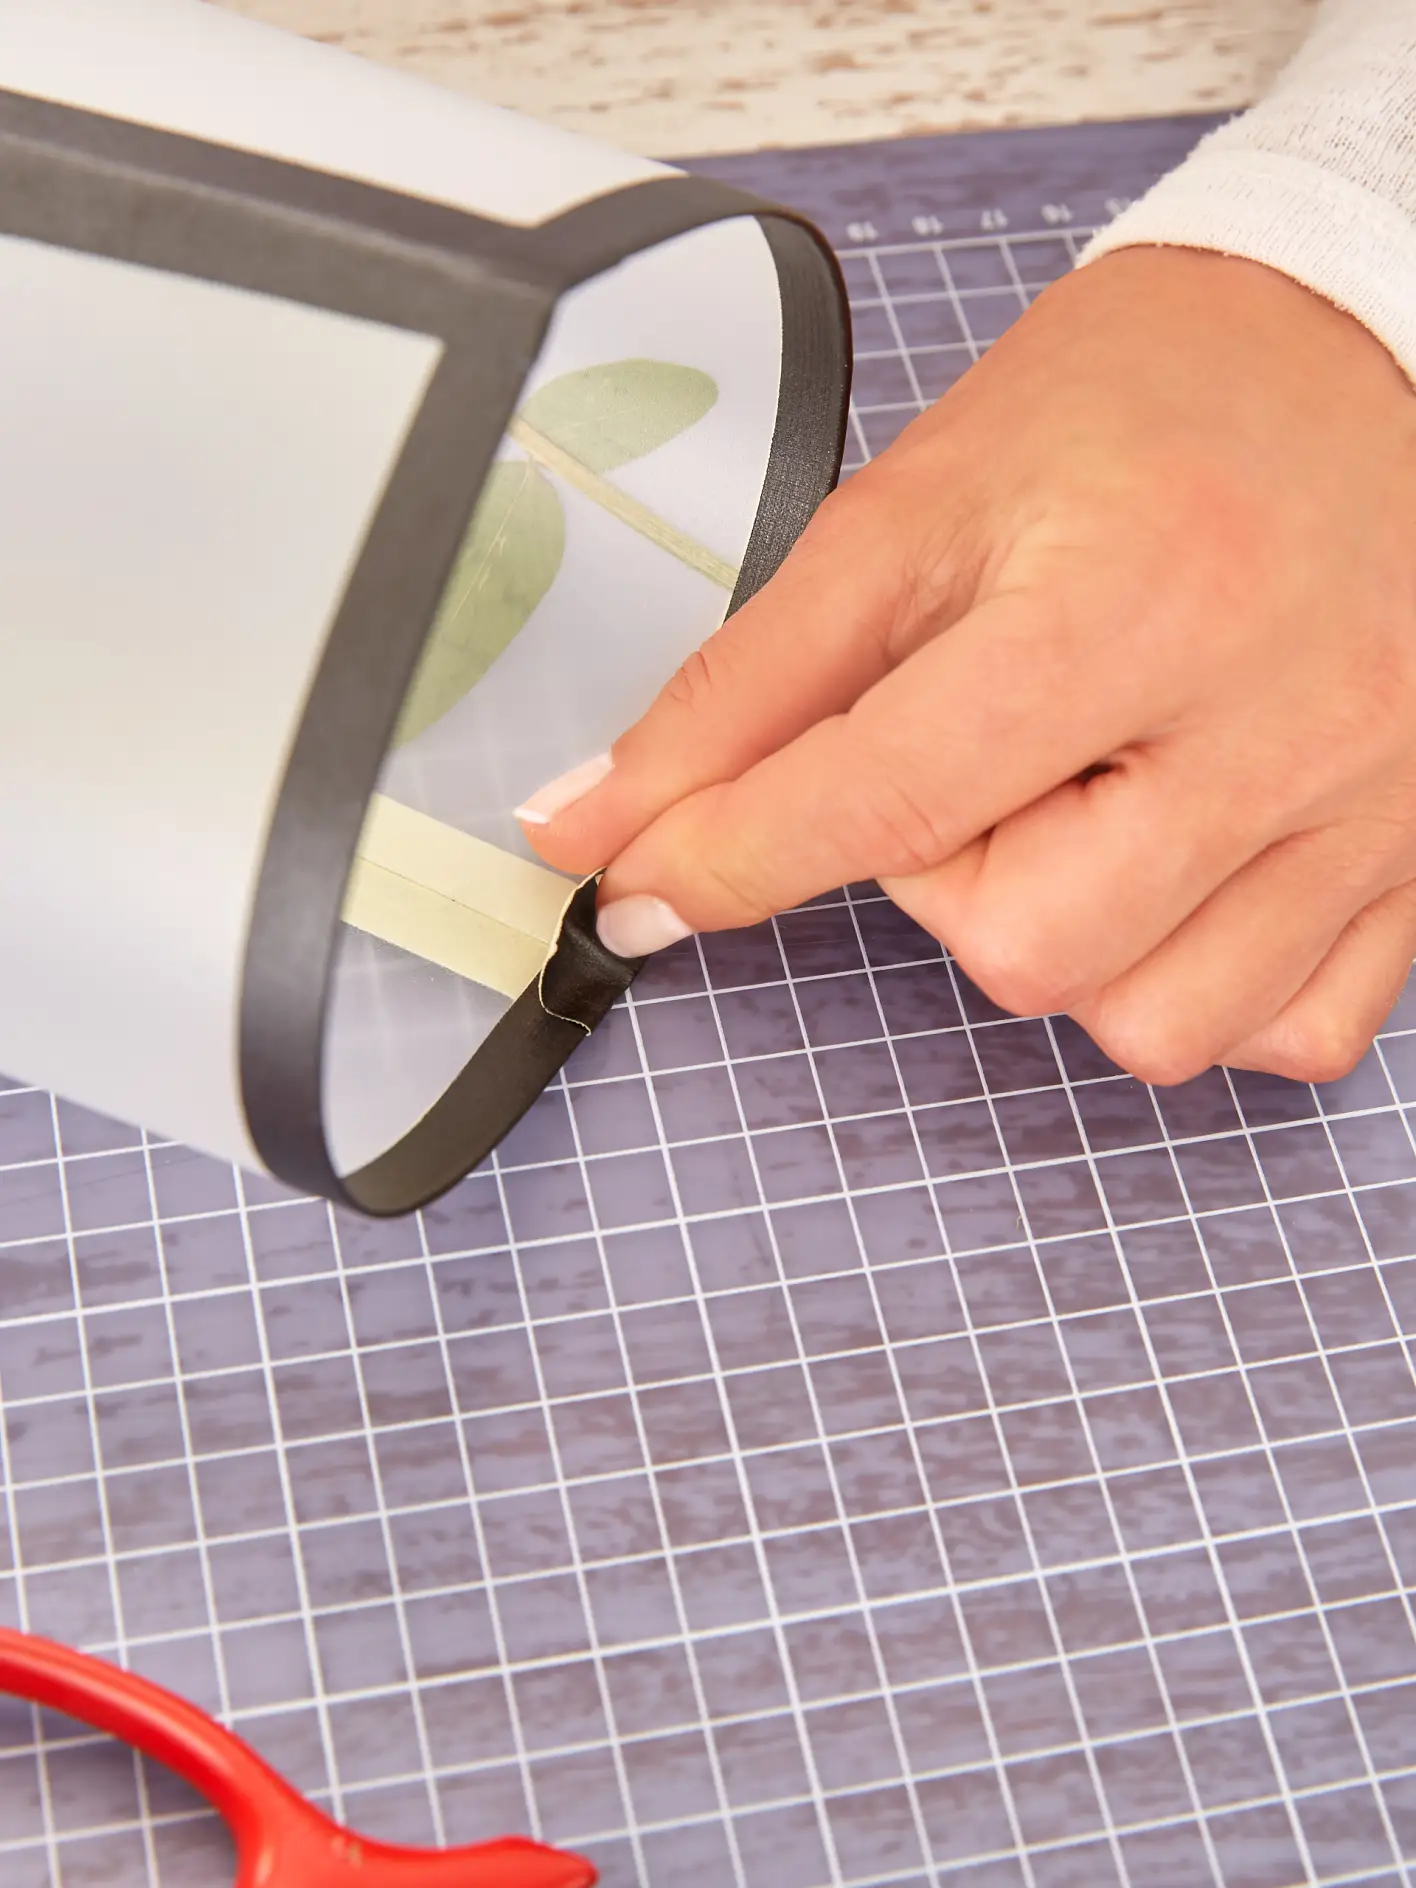 Open the sheets and tidy up the edge of the tesa extra power